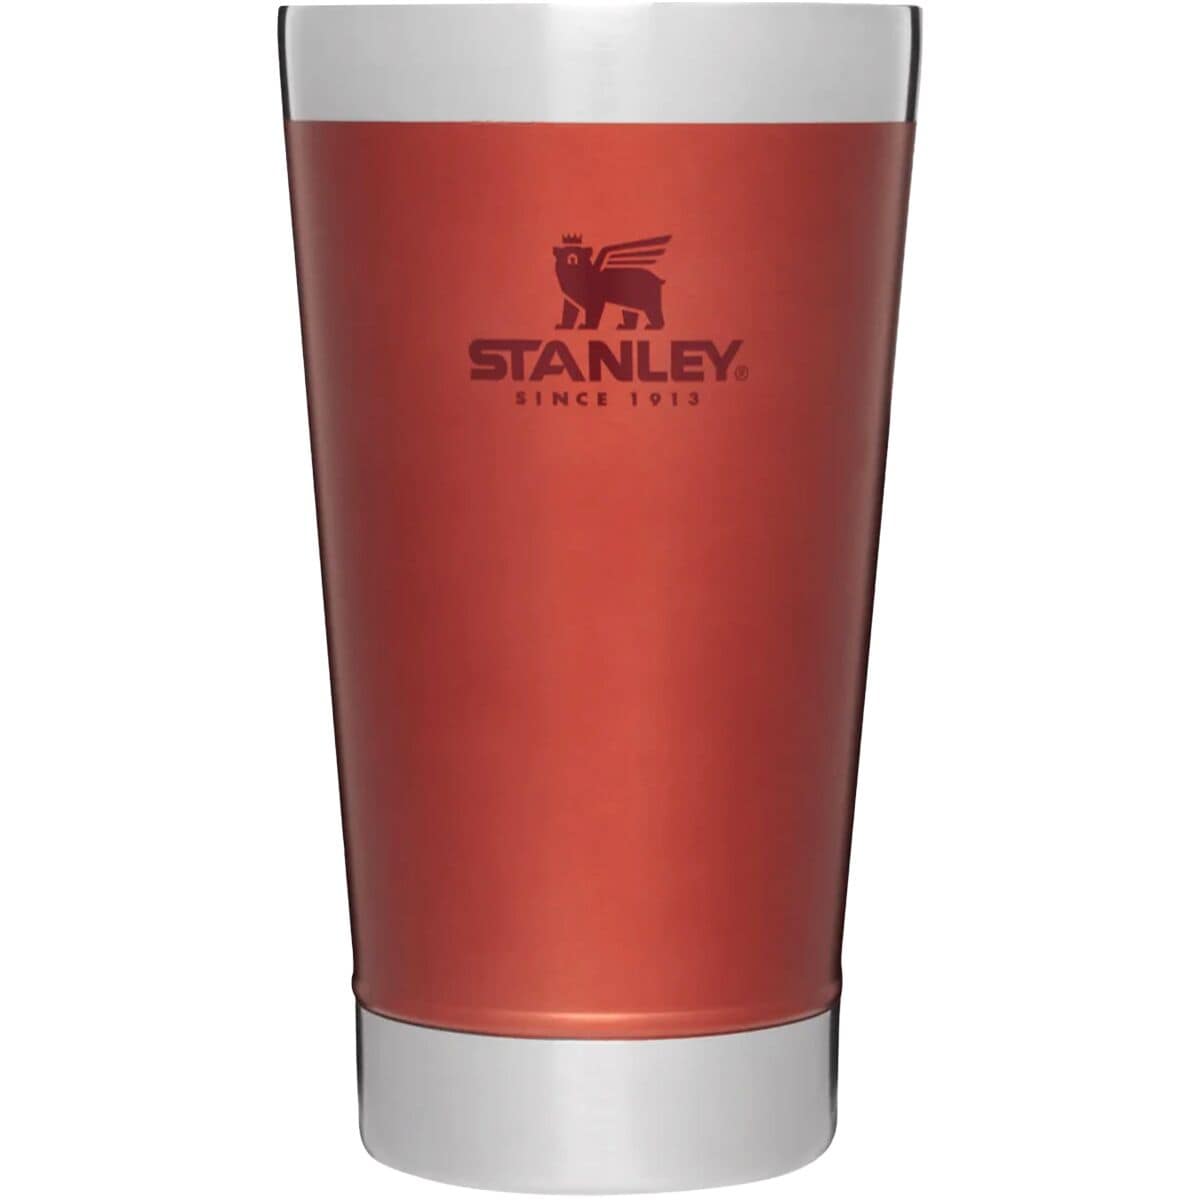 Classic Stay Chill Insulated Beer Pint, 16oz Tumbler